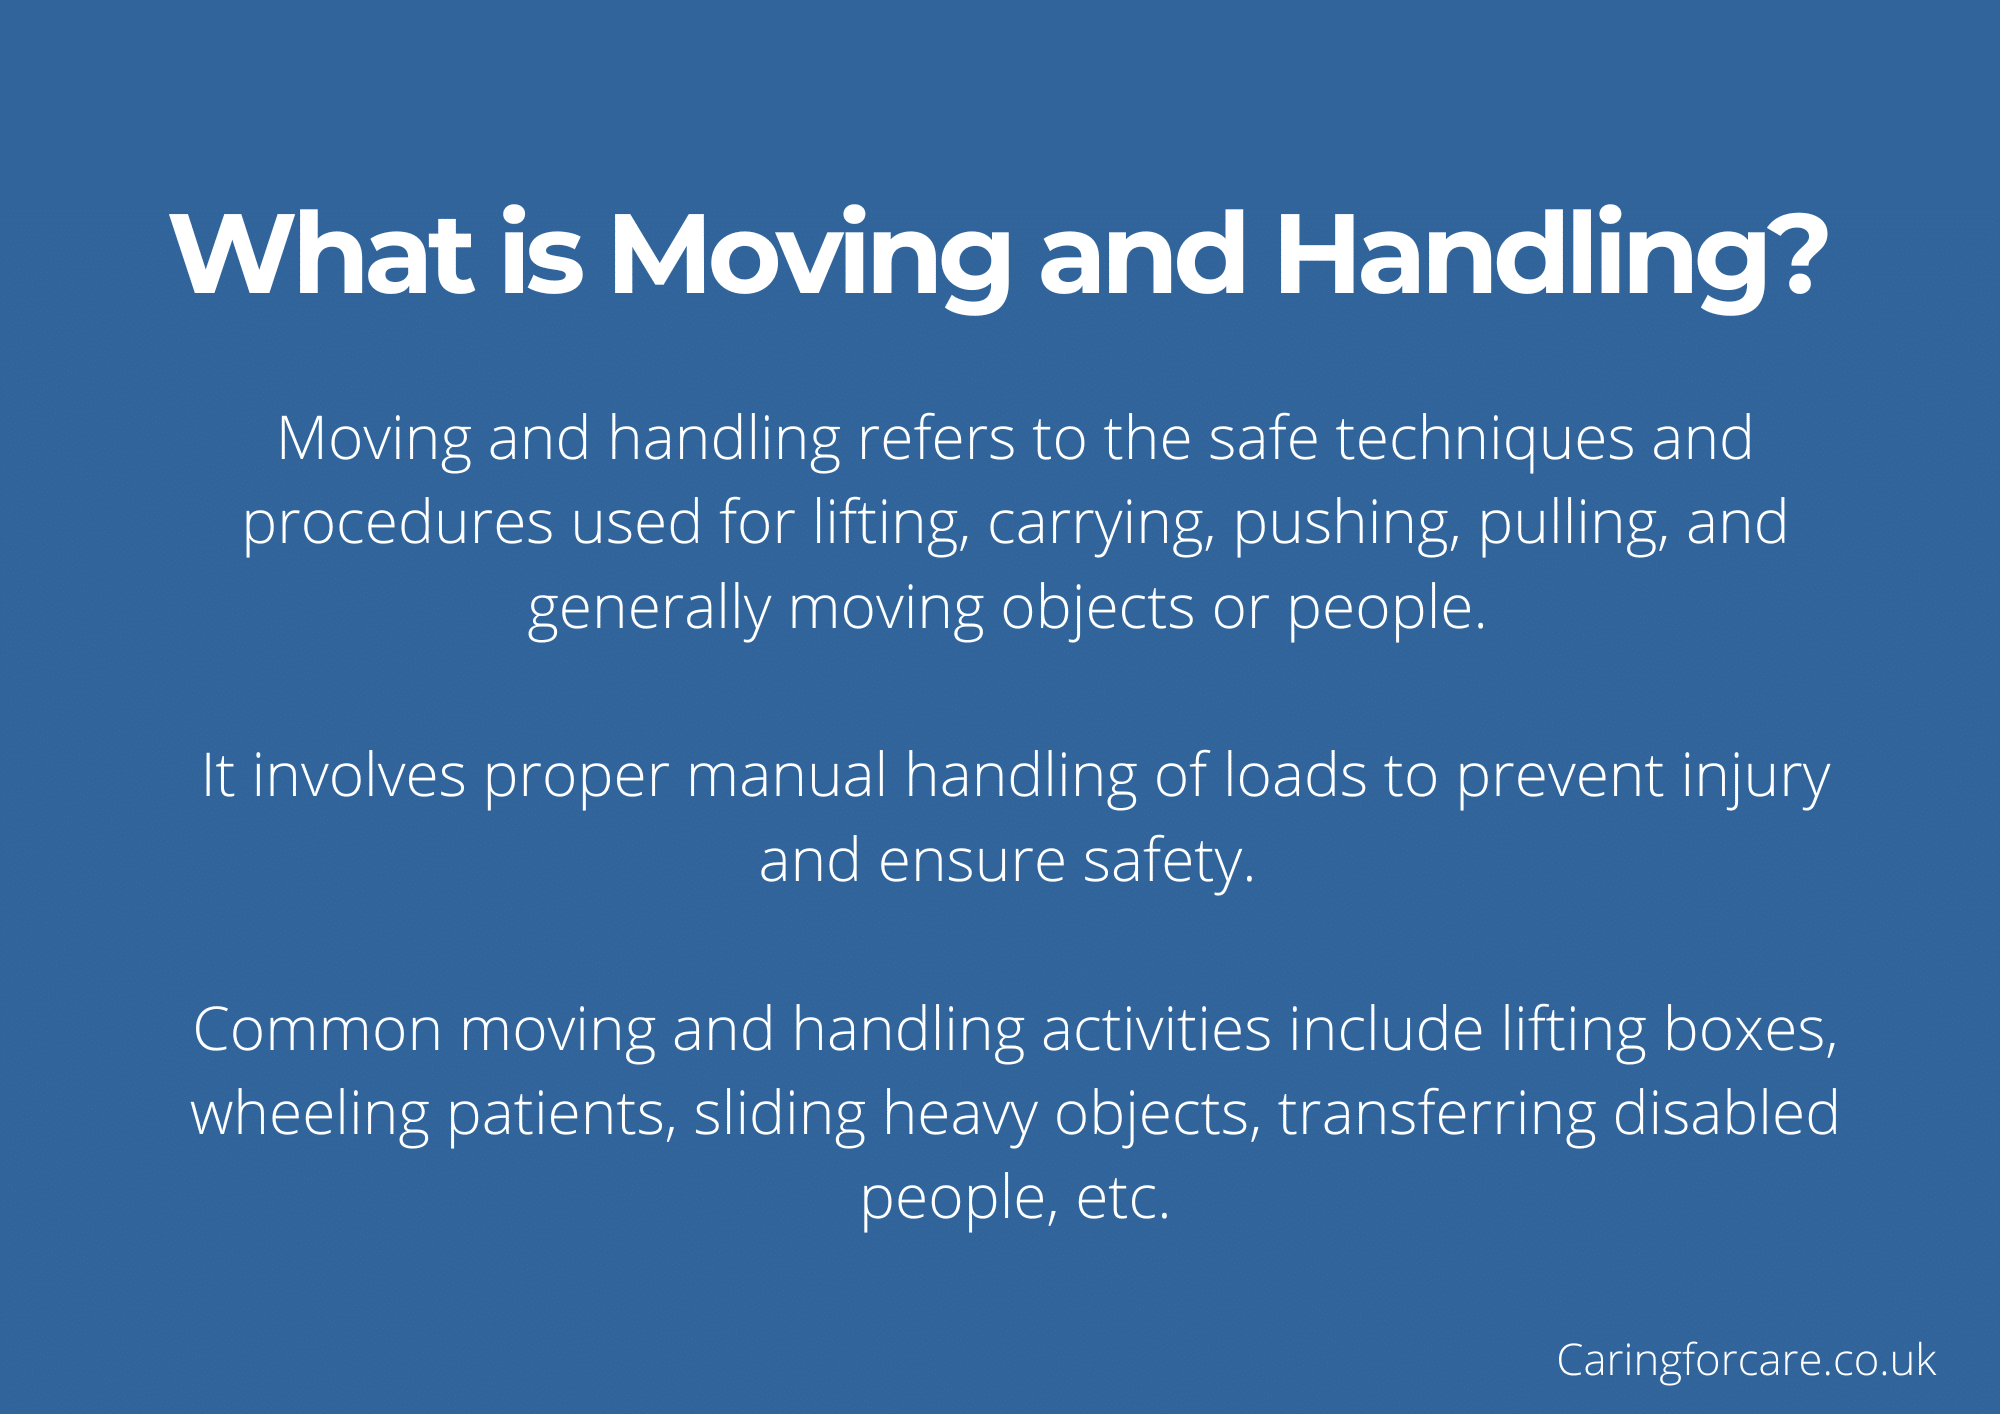 What is Moving and Handling definition